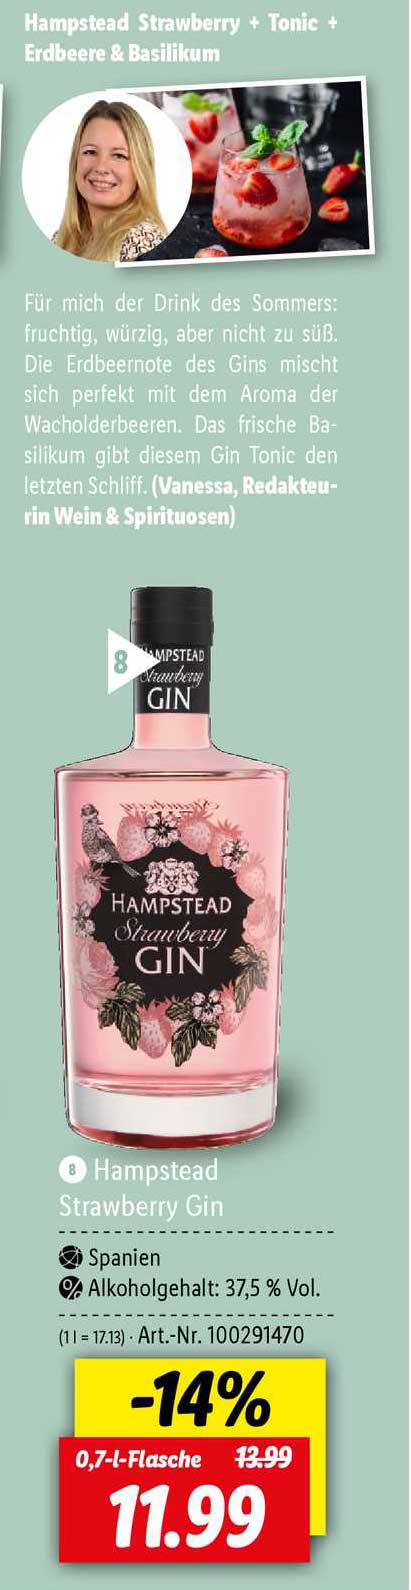 Hampstead Strawberry Gin bei Lidl Angebot